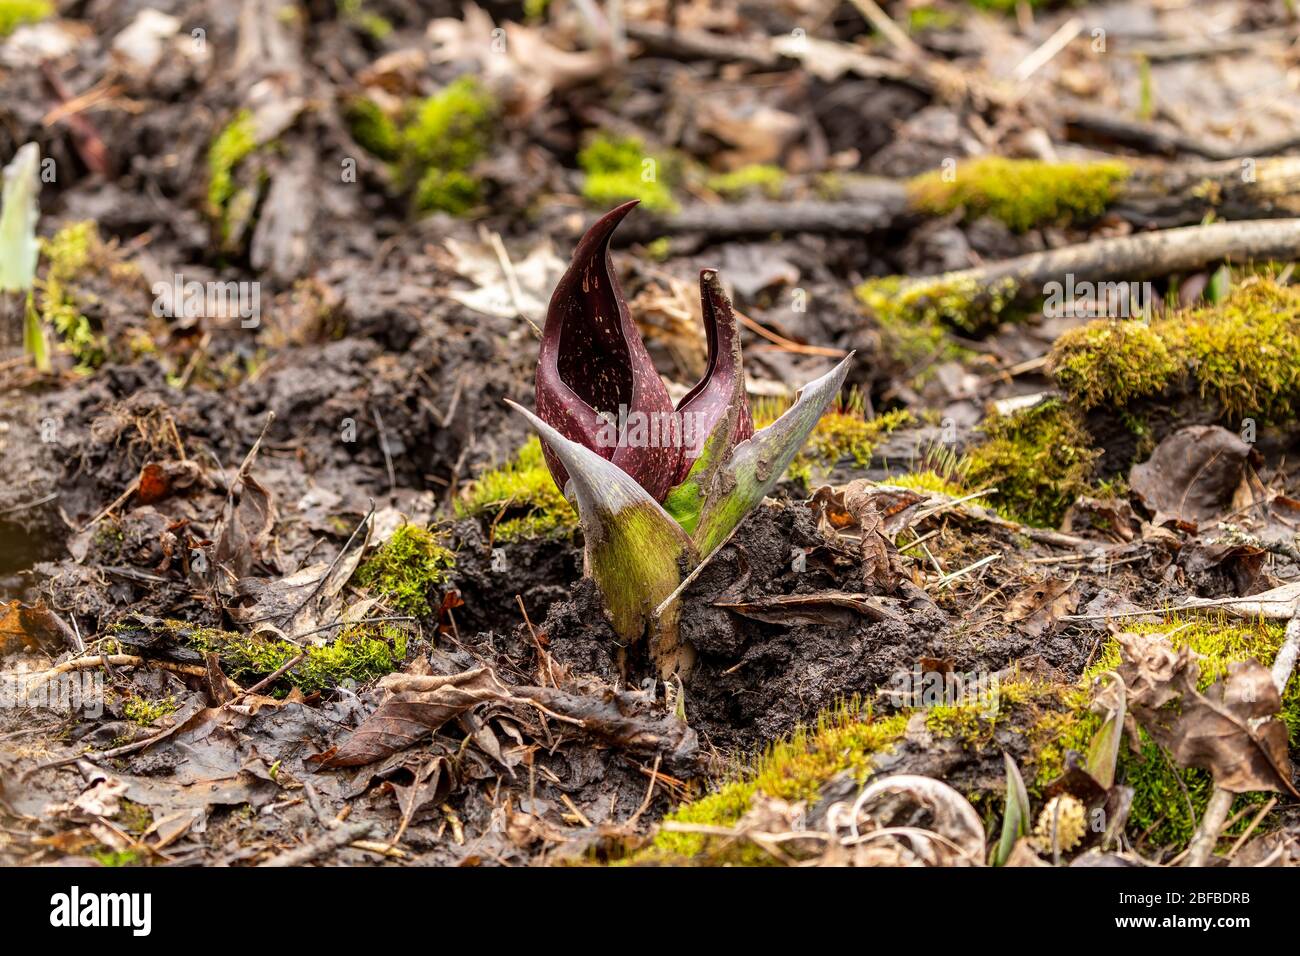 Skunk Cabbage. Wisconsin’s First Spring Flowers. Skunk Cabbage is native Wisconsin florals and one of the earliest blooming perennial wildflowers in s Stock Photo